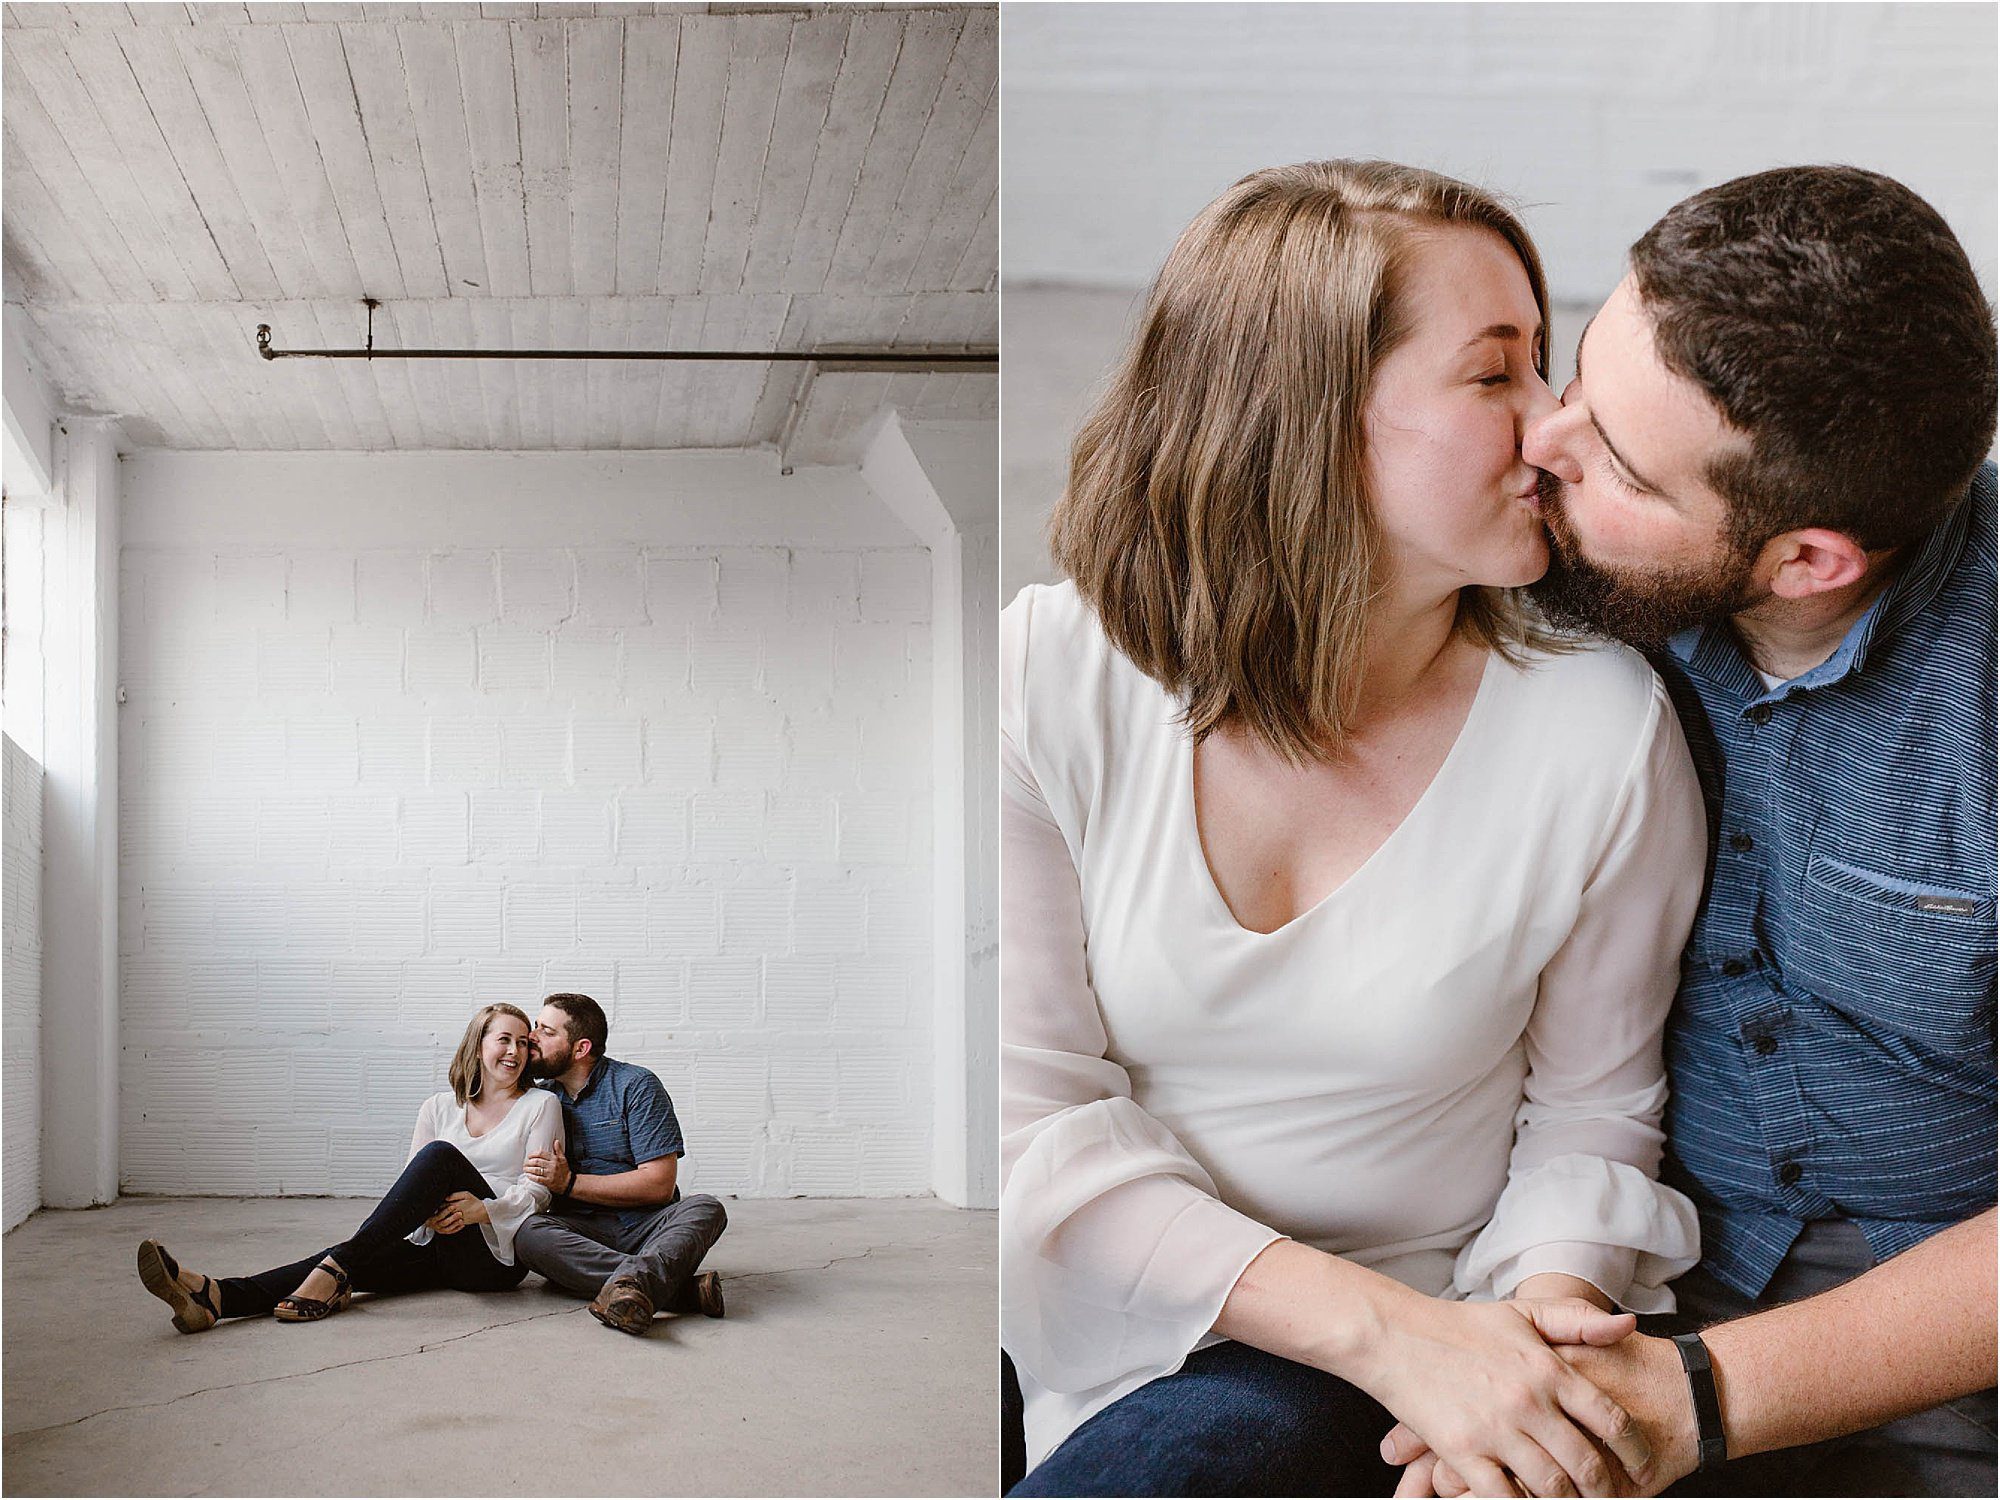 man and woman sitting and kissing against white warehouse wall